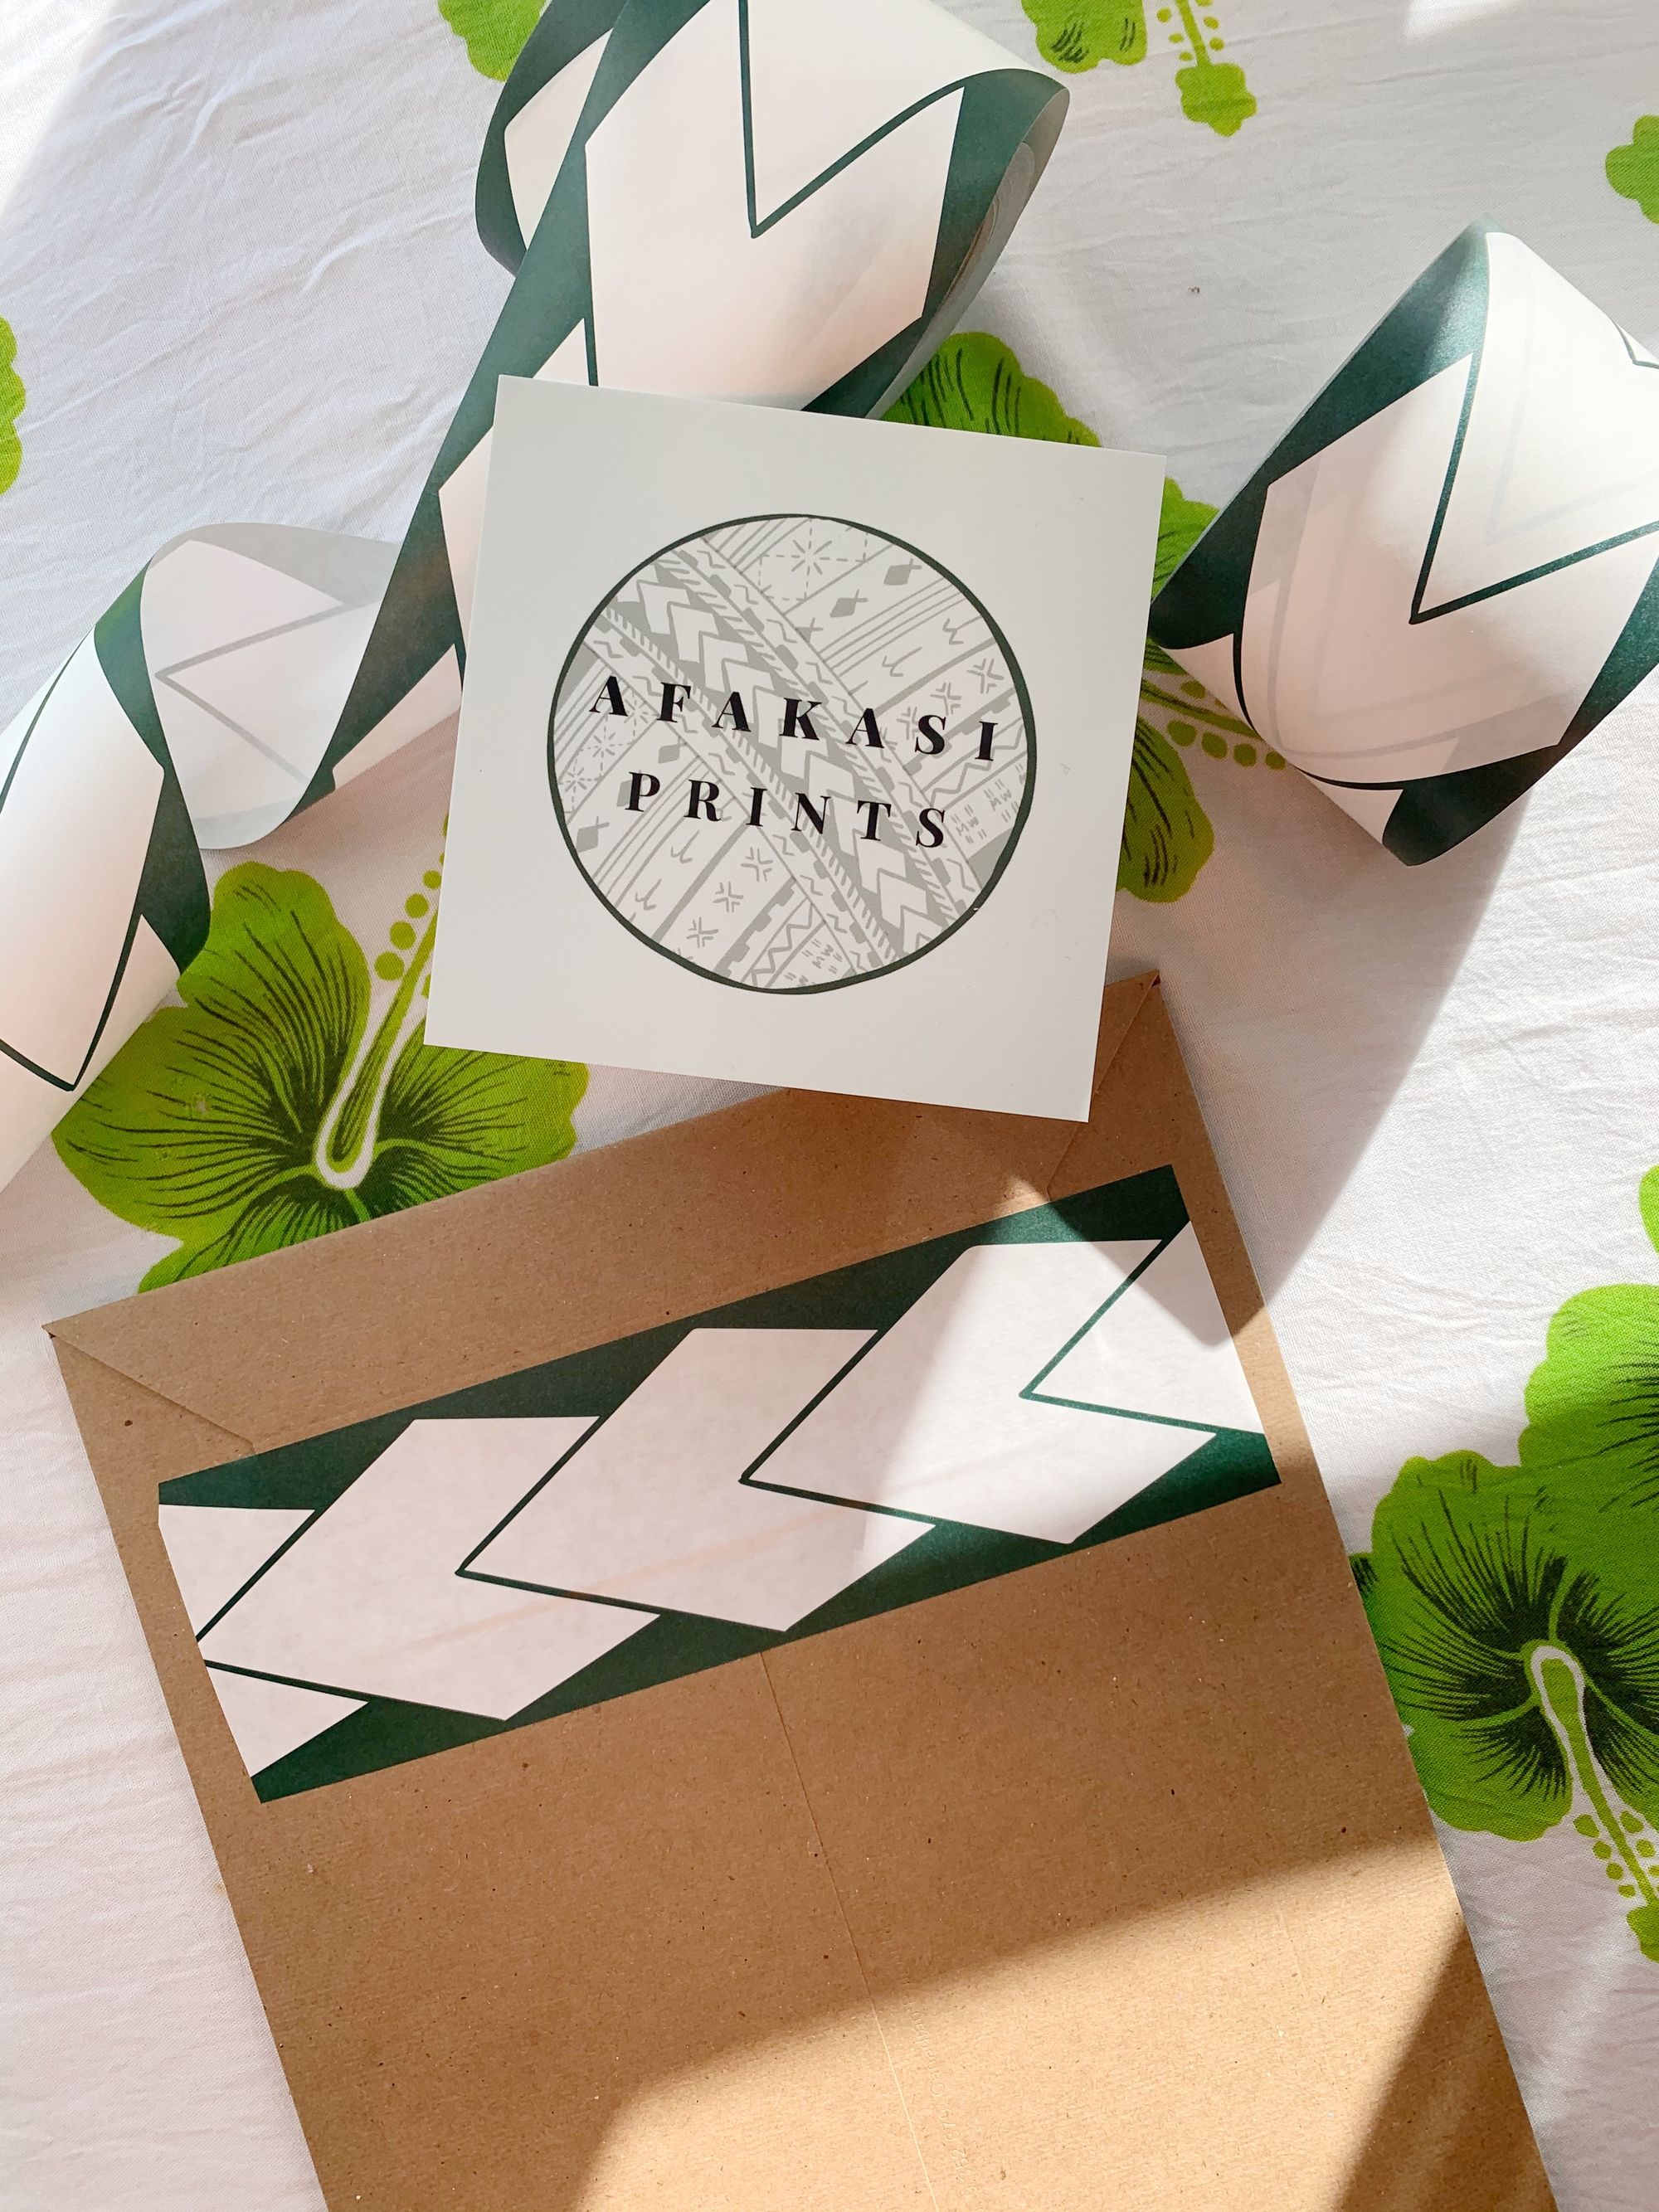 Afakasi Prints: Representing Sāmoan Culture and Making a Difference